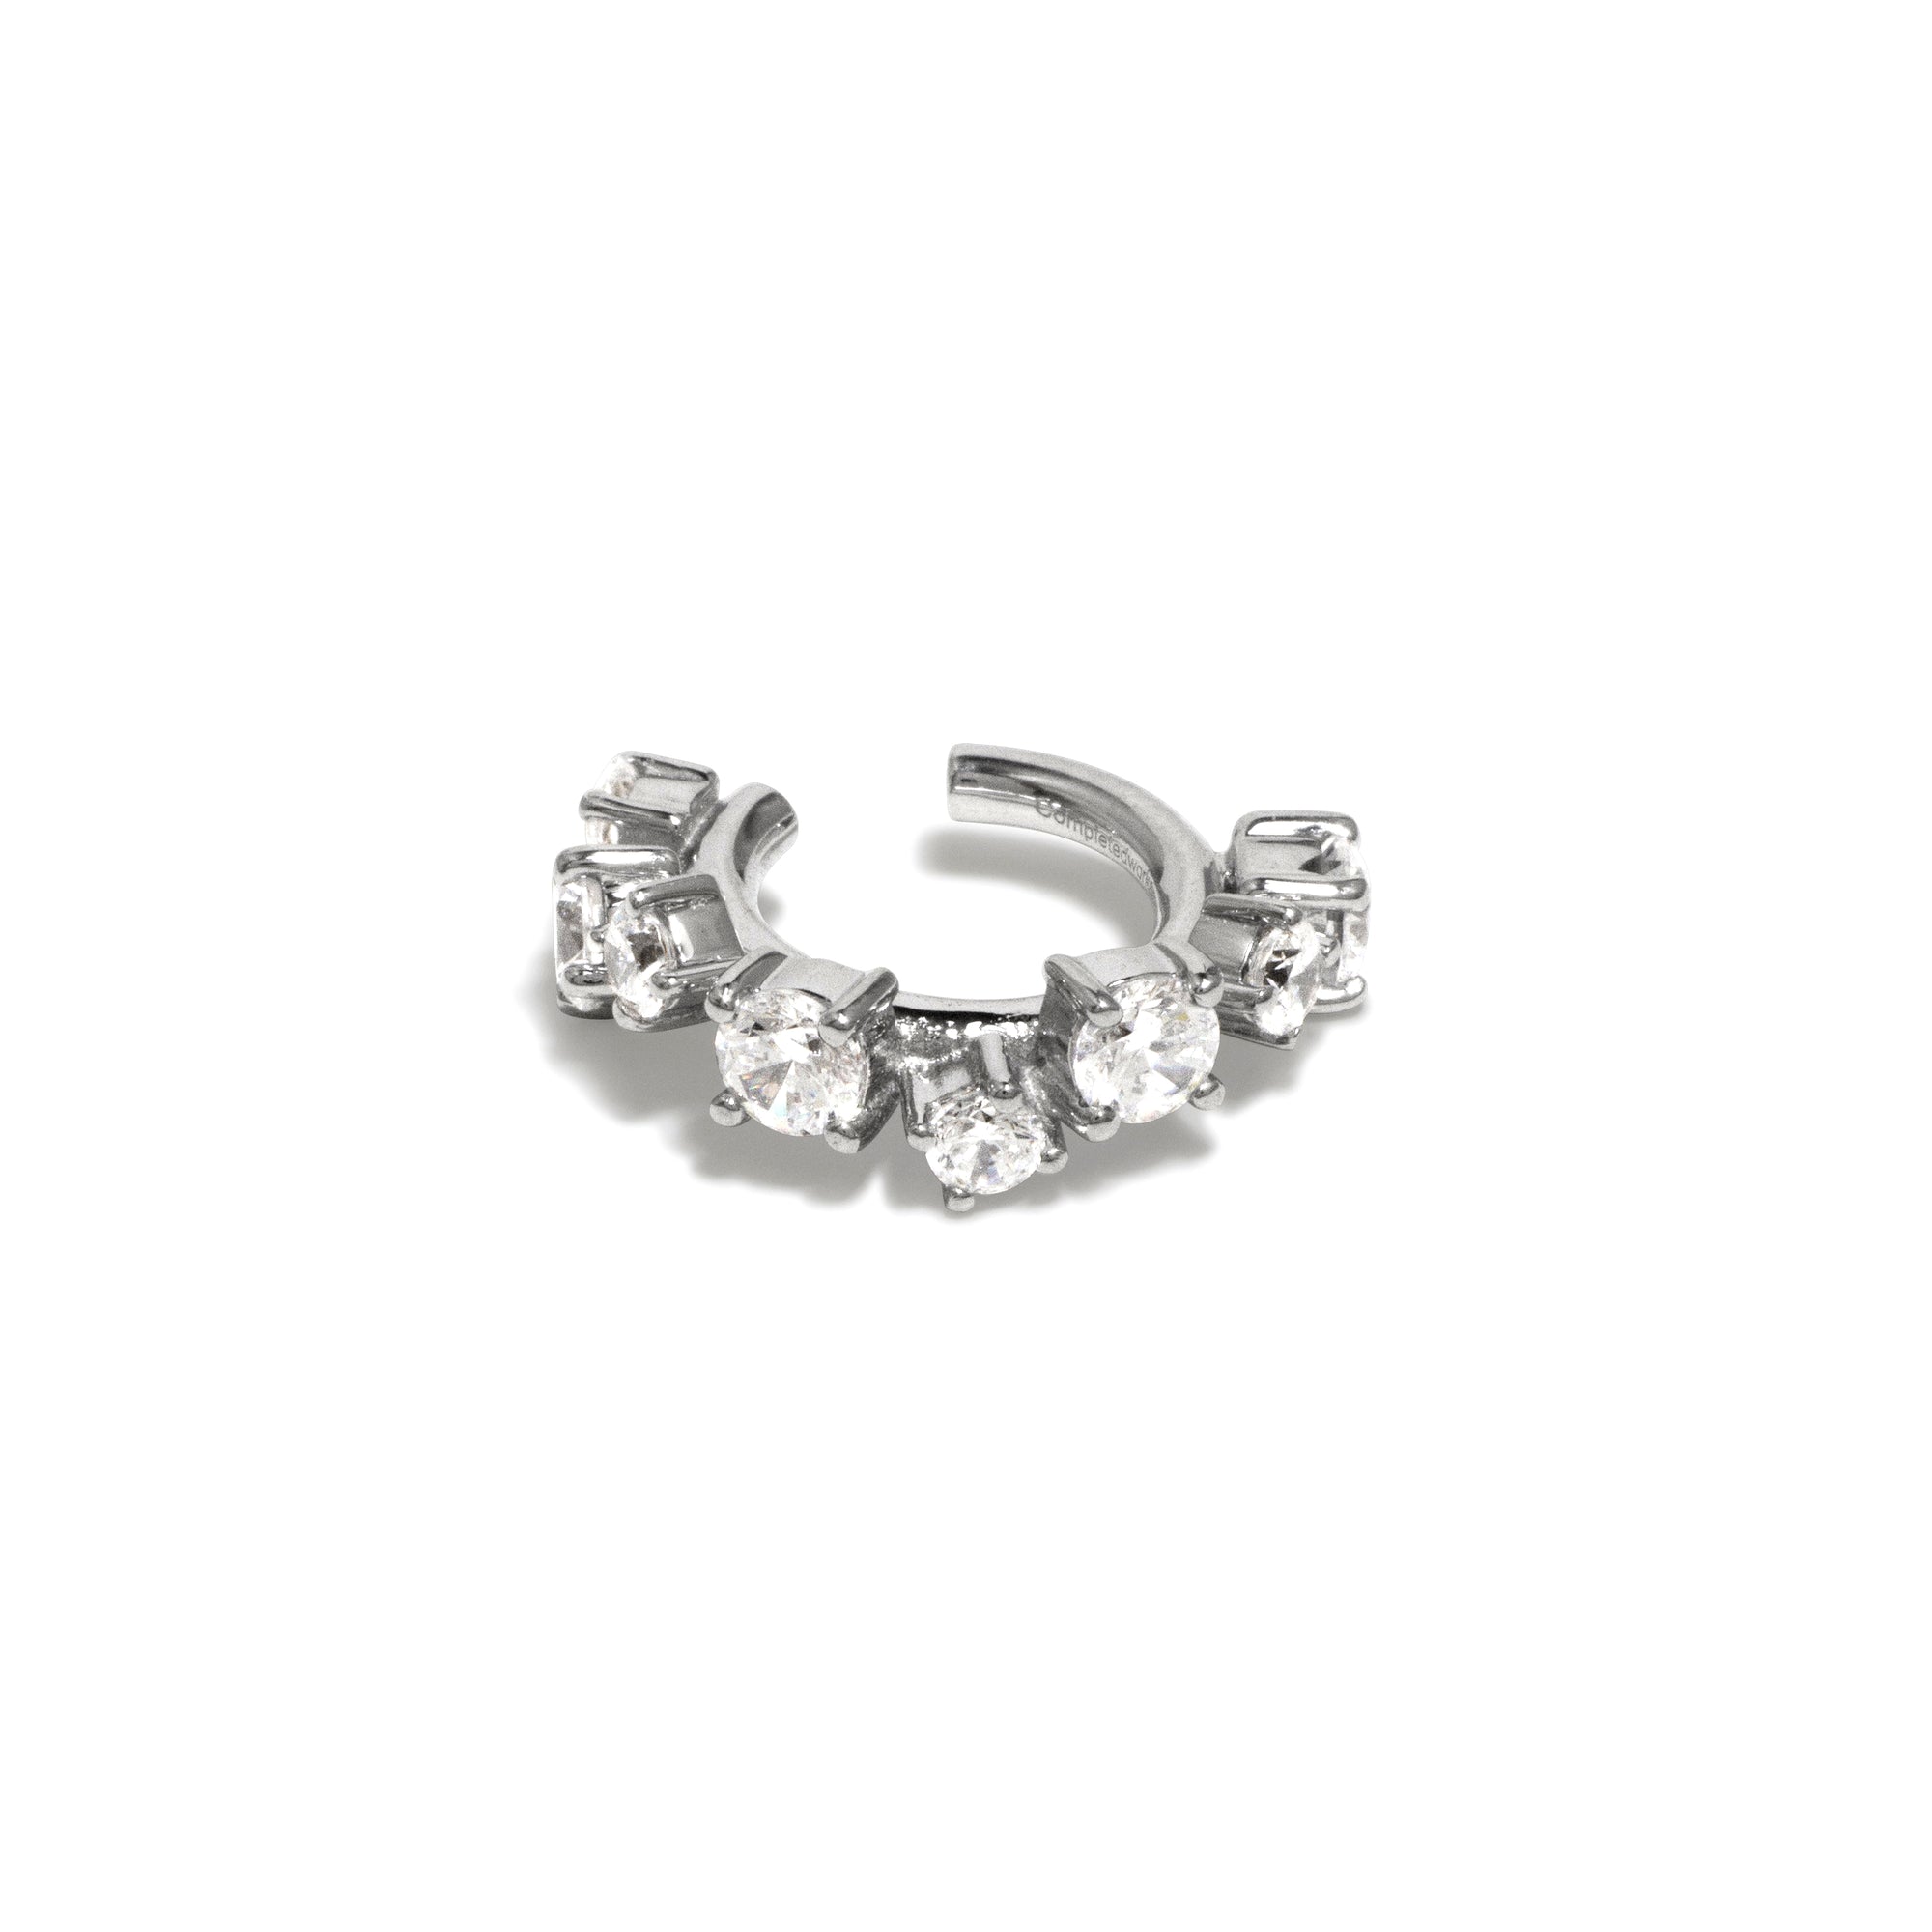 Completedworks - Z25 Ear Cuffs - (Silver) view 1